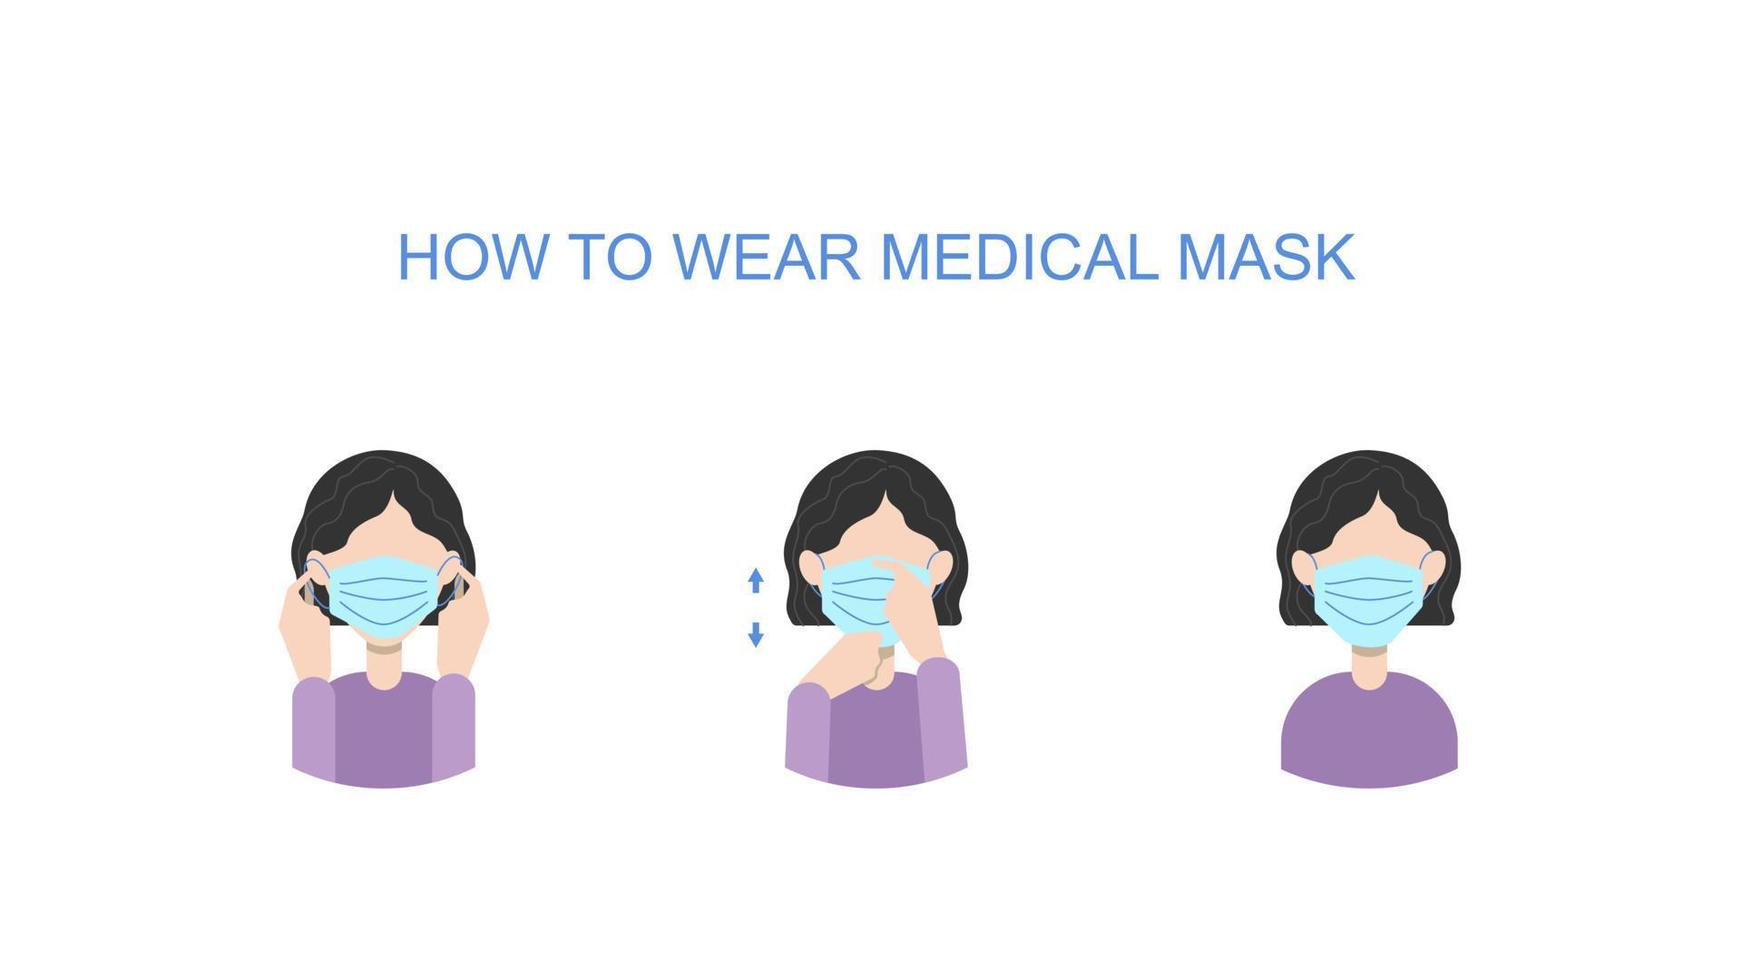 How to wear medical mask instructions. Virus protection advice. Woman wear protective mask. Vector illustration.